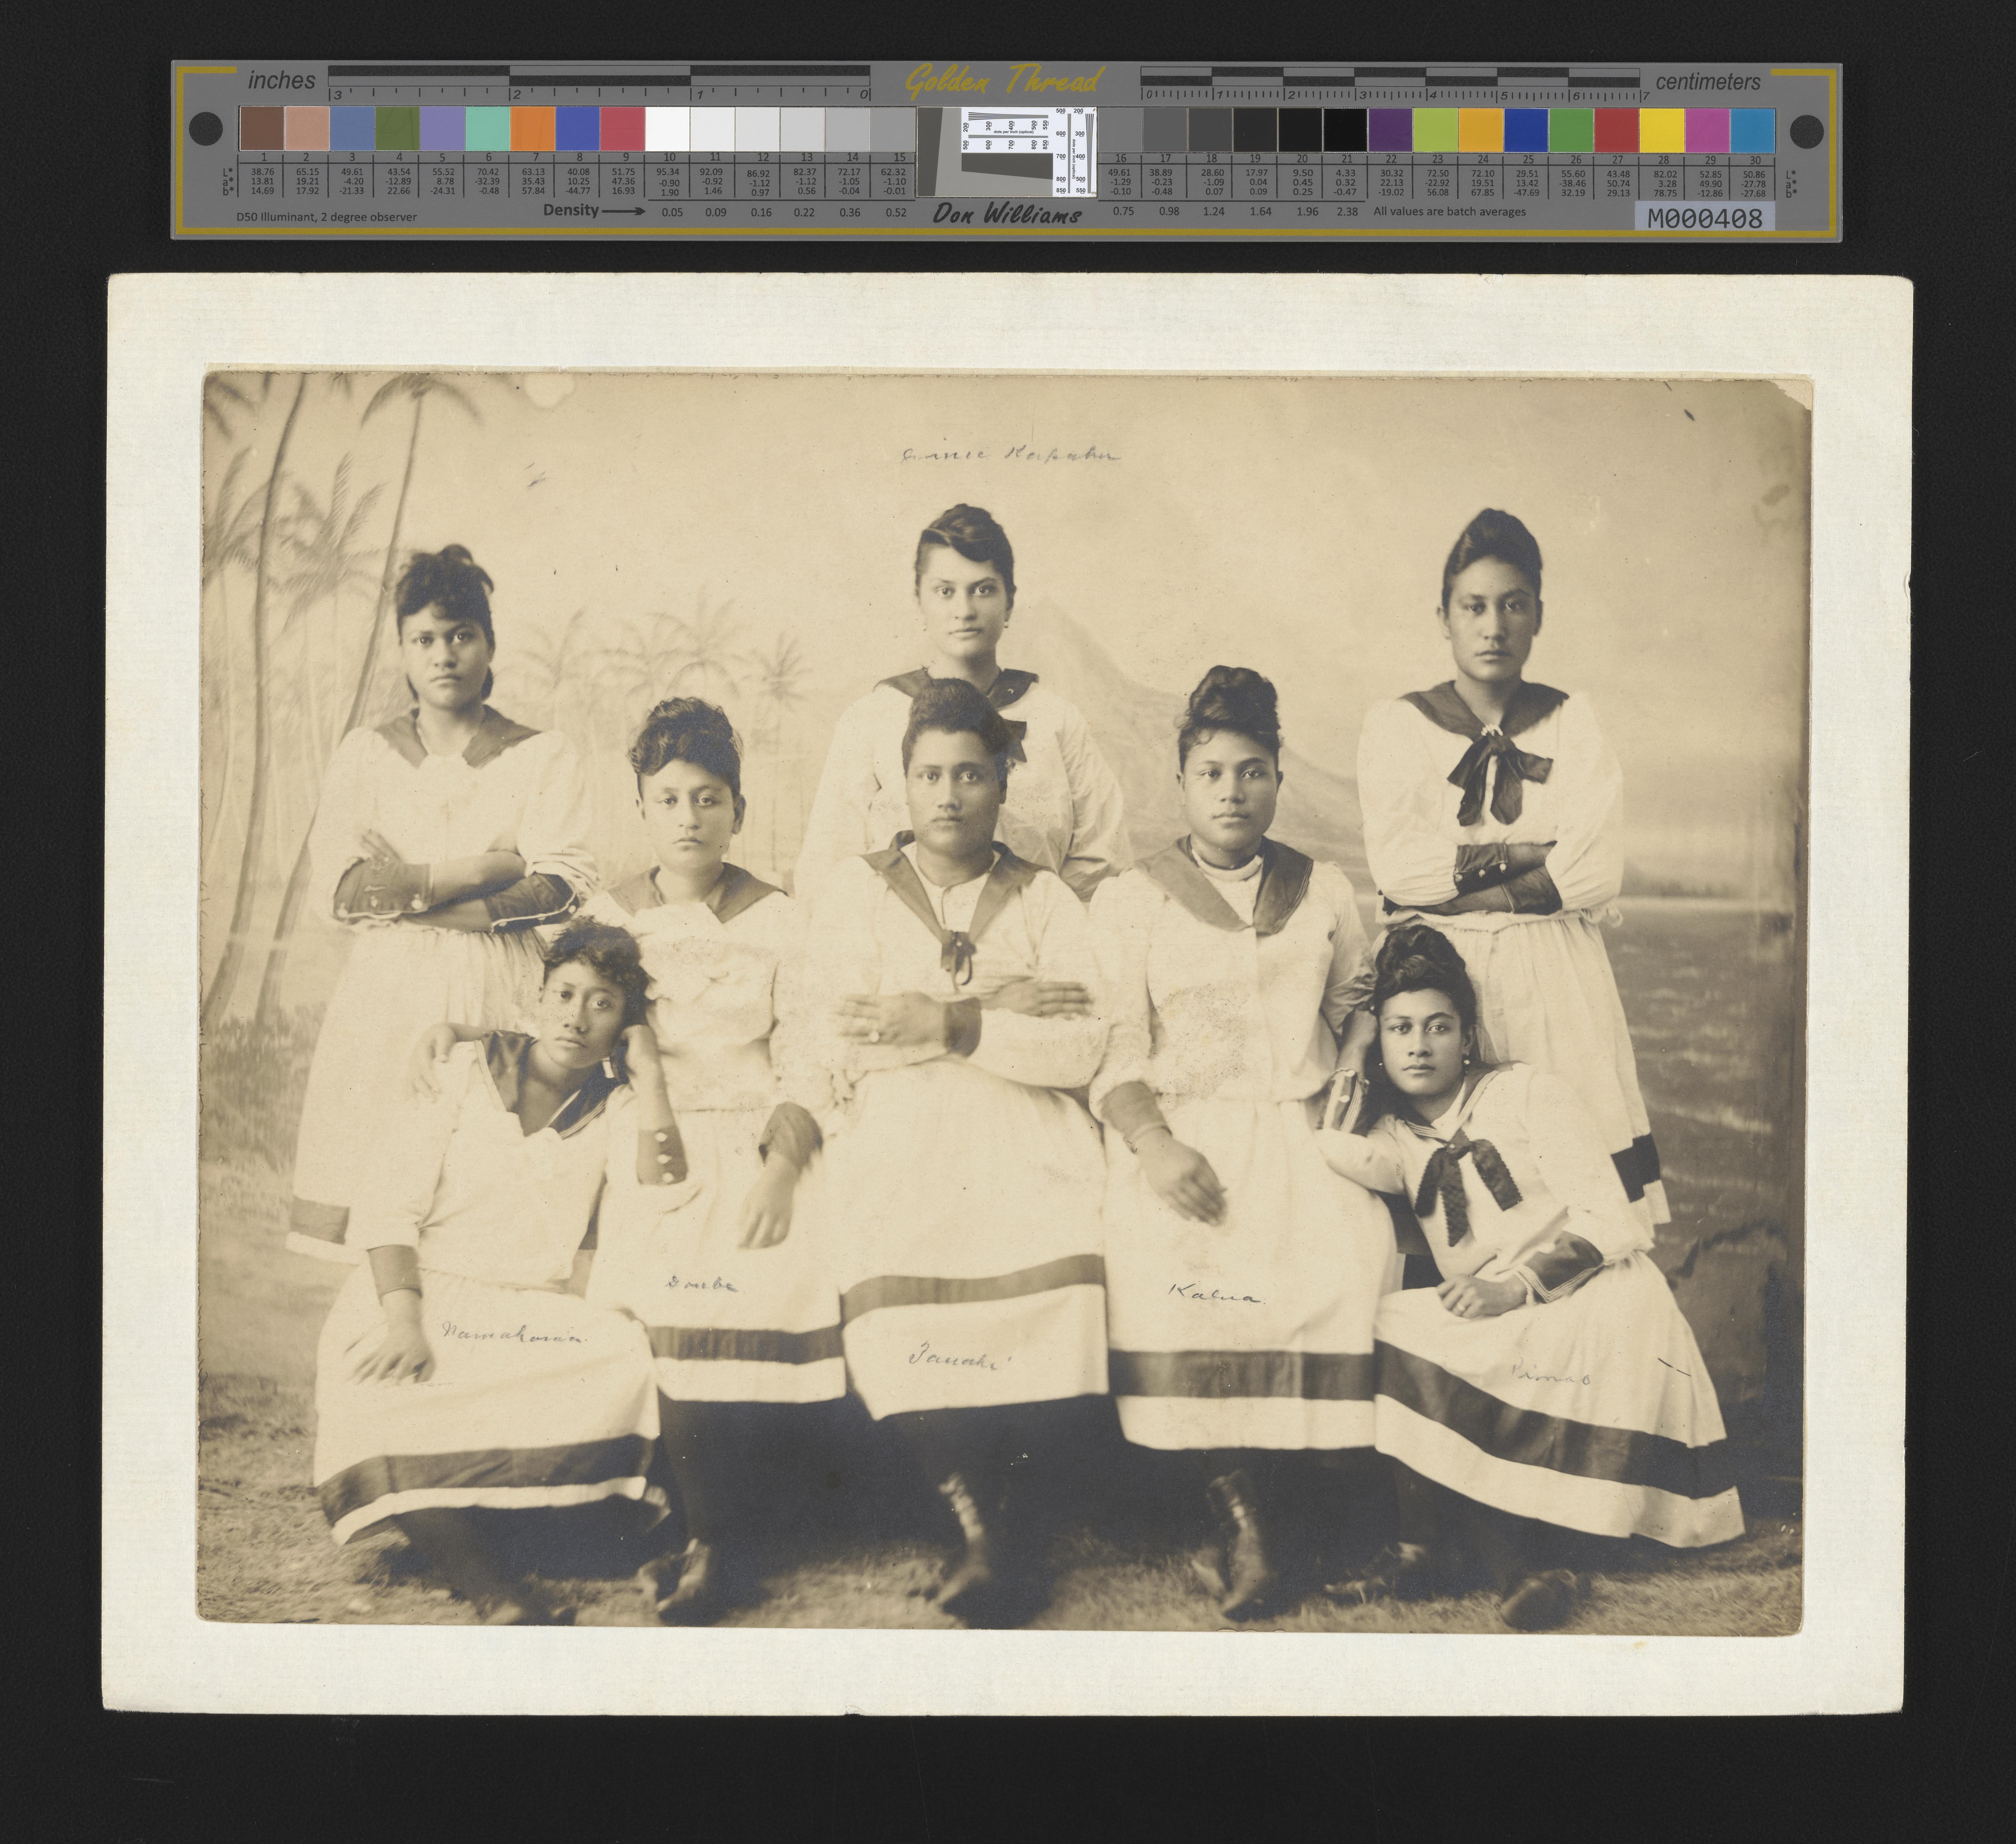 Eight female members of a Hula troupe in the late 1800s pose for a portrait.